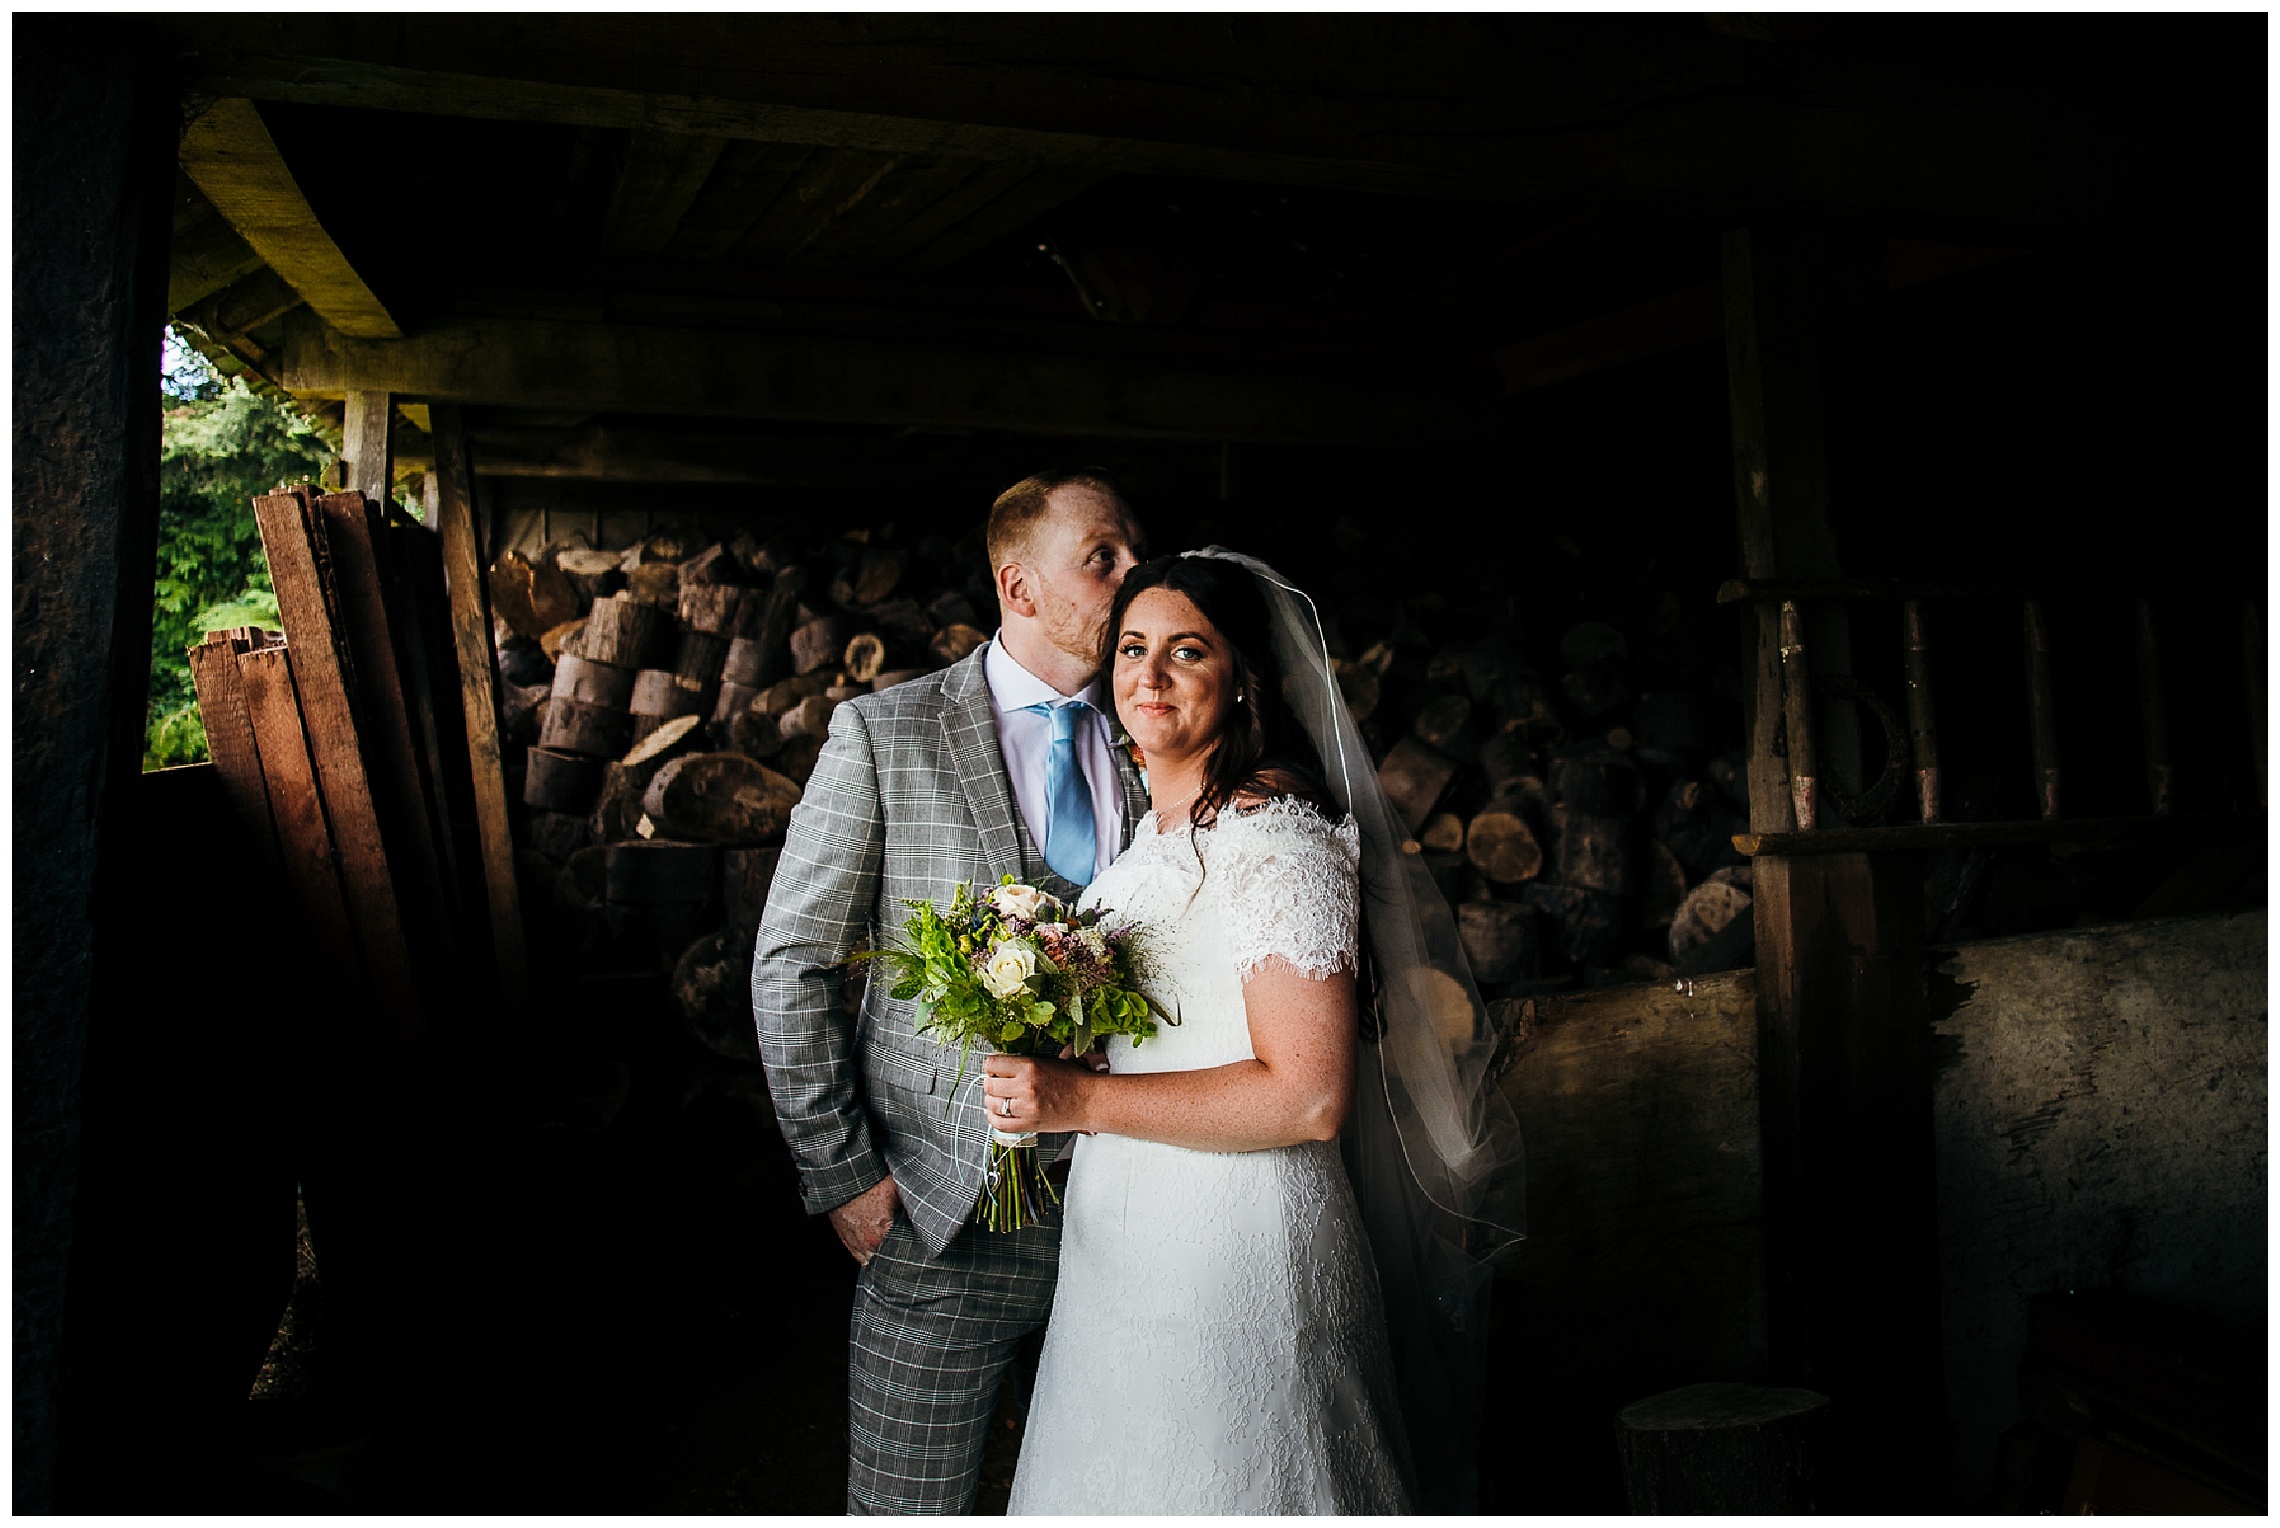 bride and groom standing together with flowers in dark shed